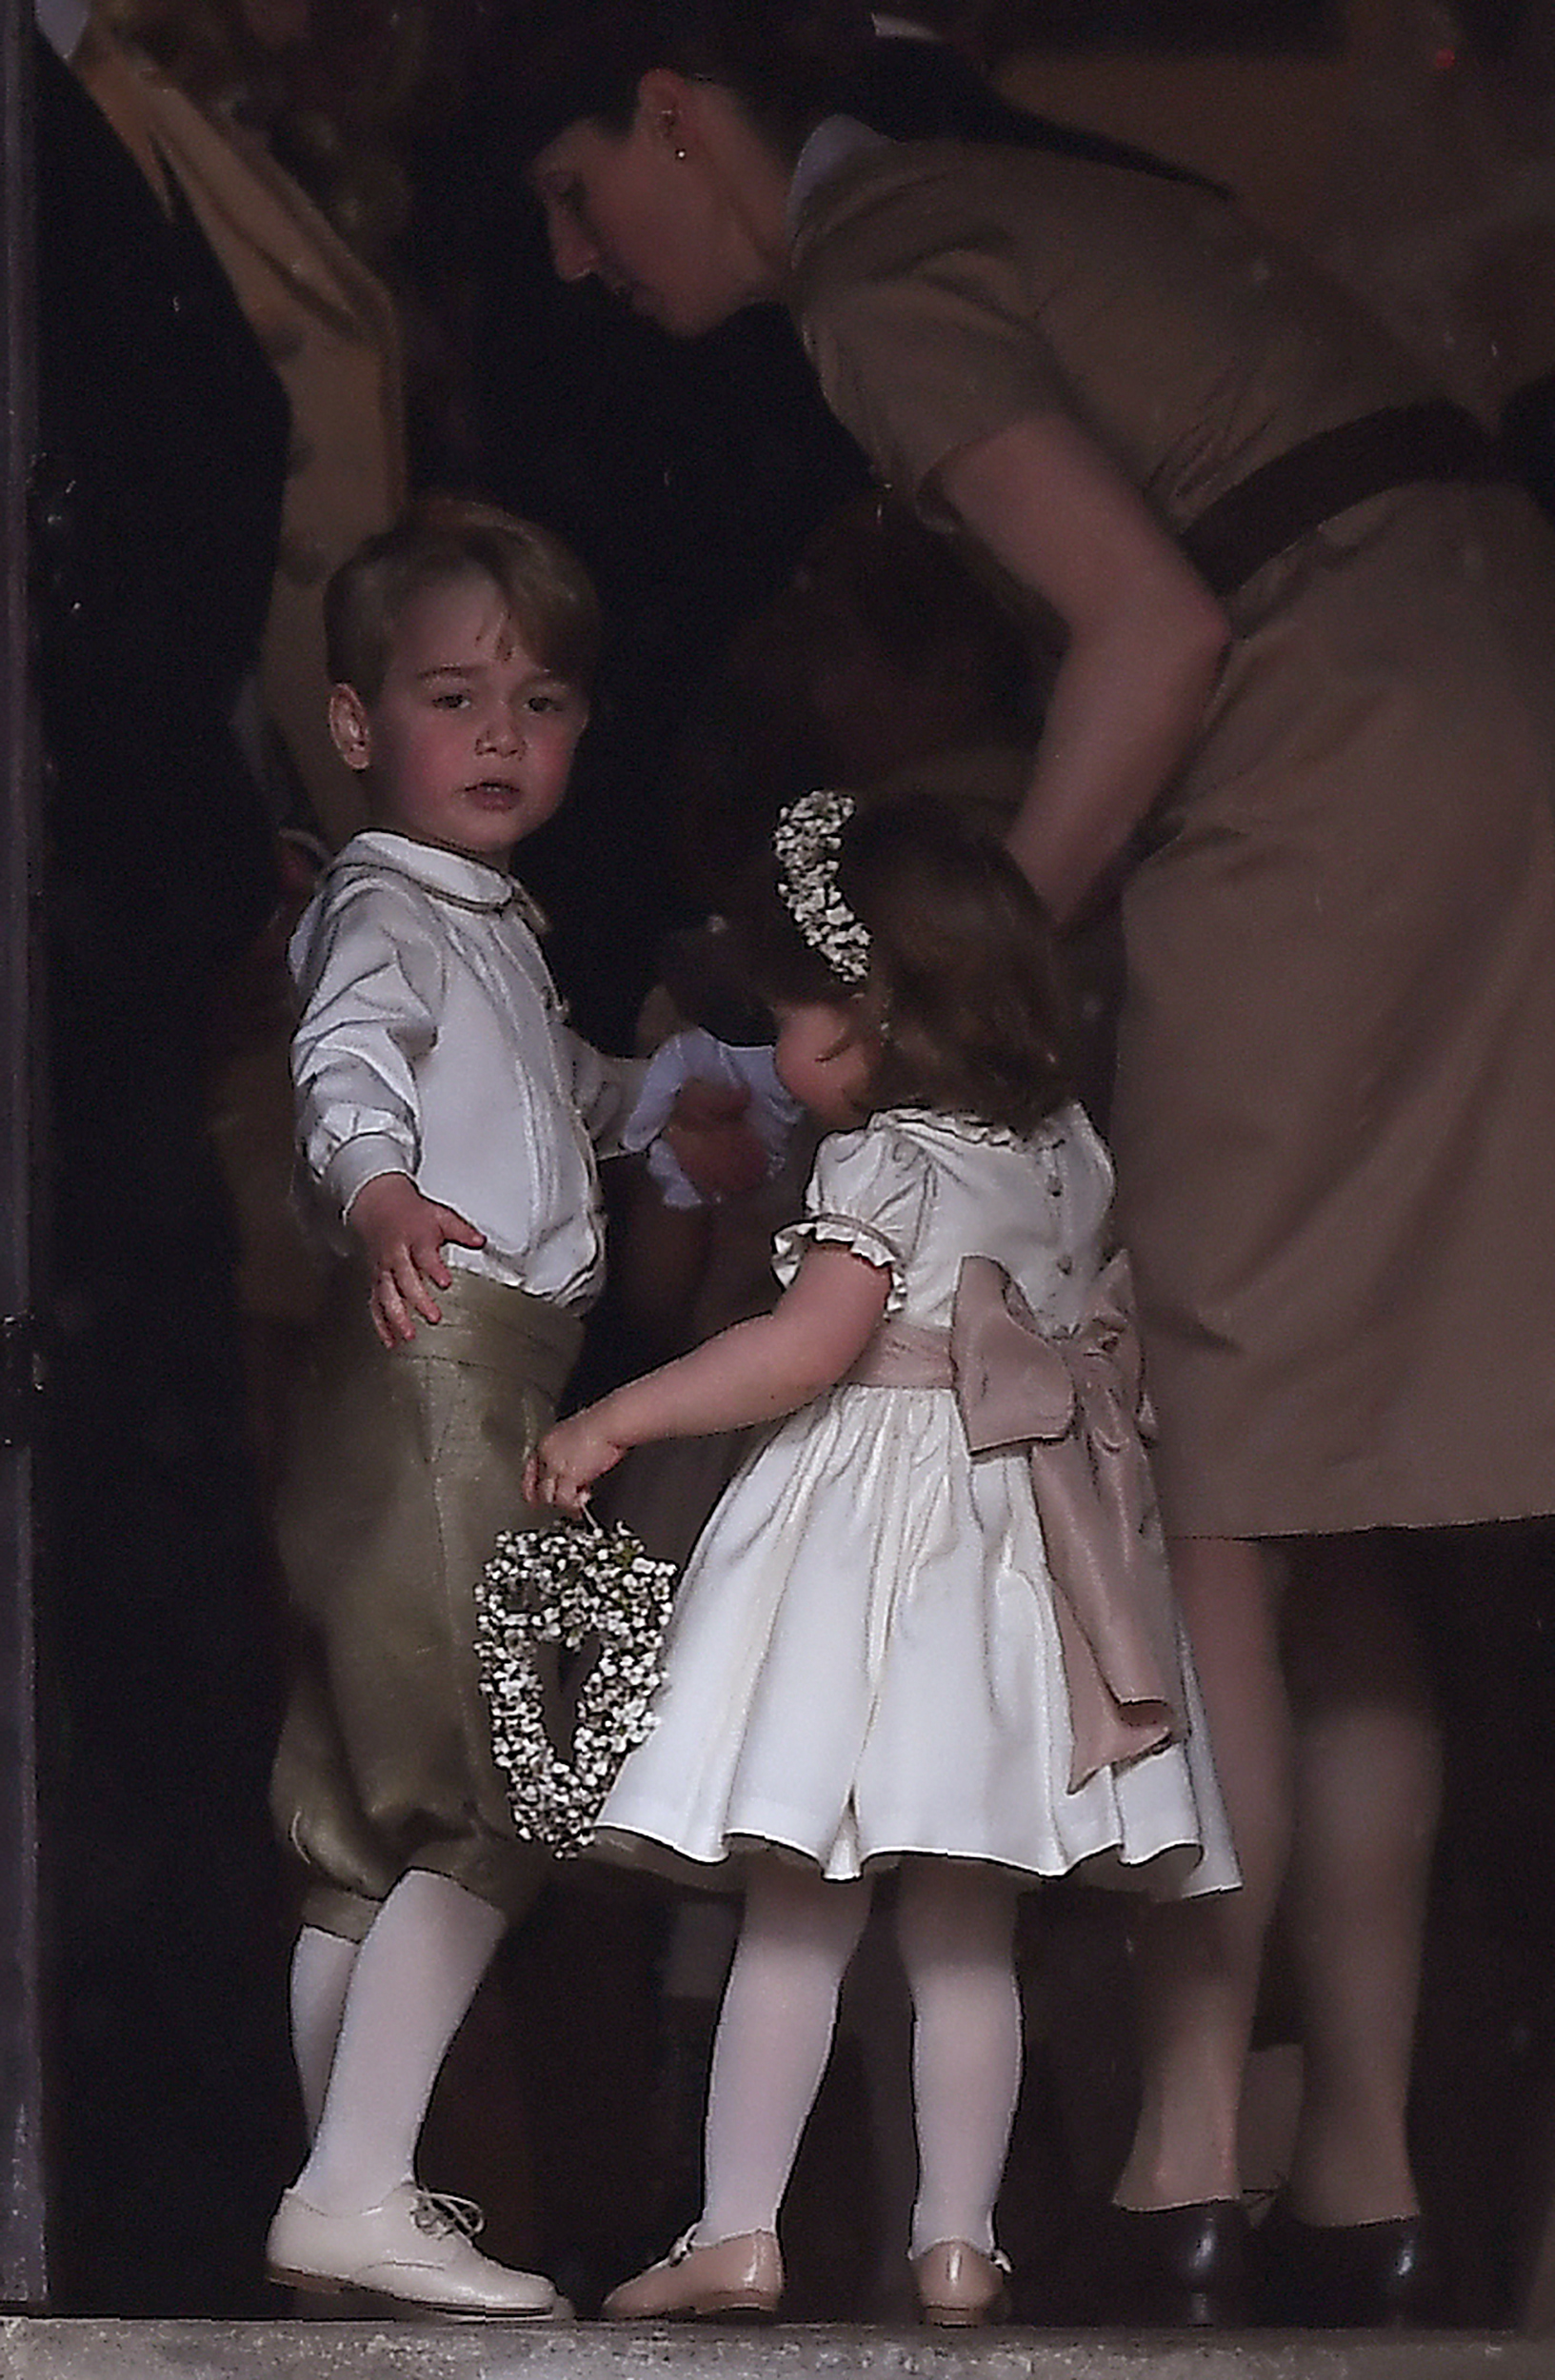 Maria Borrallo, Prince George, and Princess Charlotte the wedding of their aunt Pippa Middleton to James Matthews at St Mark's Church in Englefield, West of London, on May 20, 2017 | Source: Getty Images